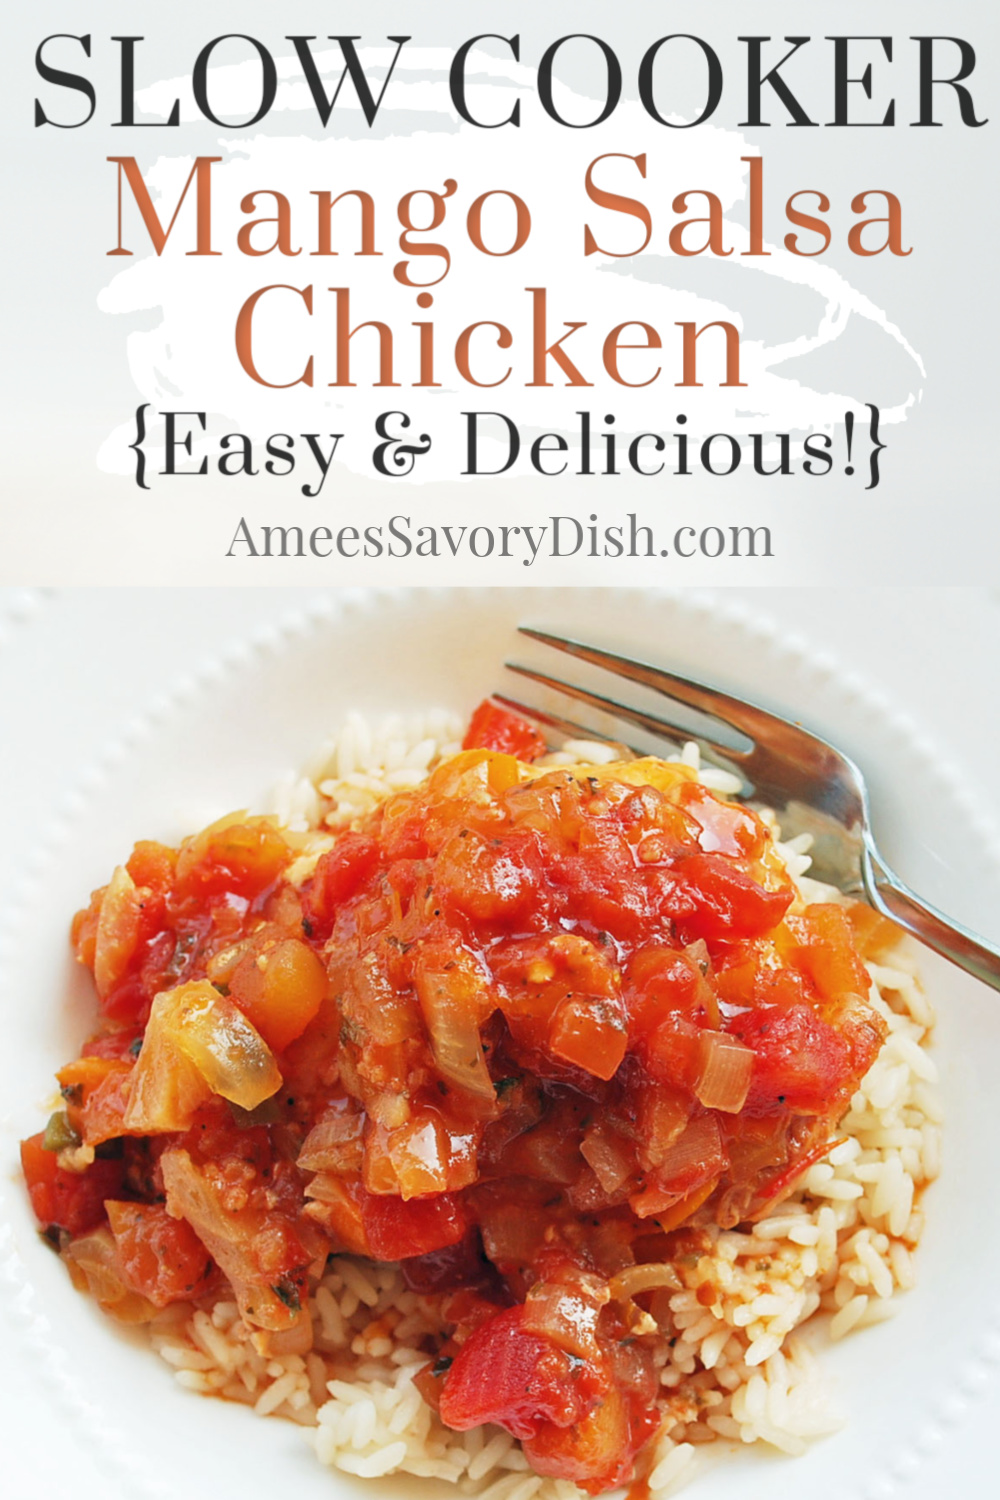 Slow cooker mango salsa chicken is an easy and delicious slow cooker dinner recipe. Sweet fruit salsa, tender boneless chicken breast, onions, garlic, tomato sauce, and a kick of cayenne for a sweet and spicy meal! #slowcookerchicken #slowcookerrecipe #chickenrecipe #easychickenrecipe #salsachicken via @Ameessavorydish